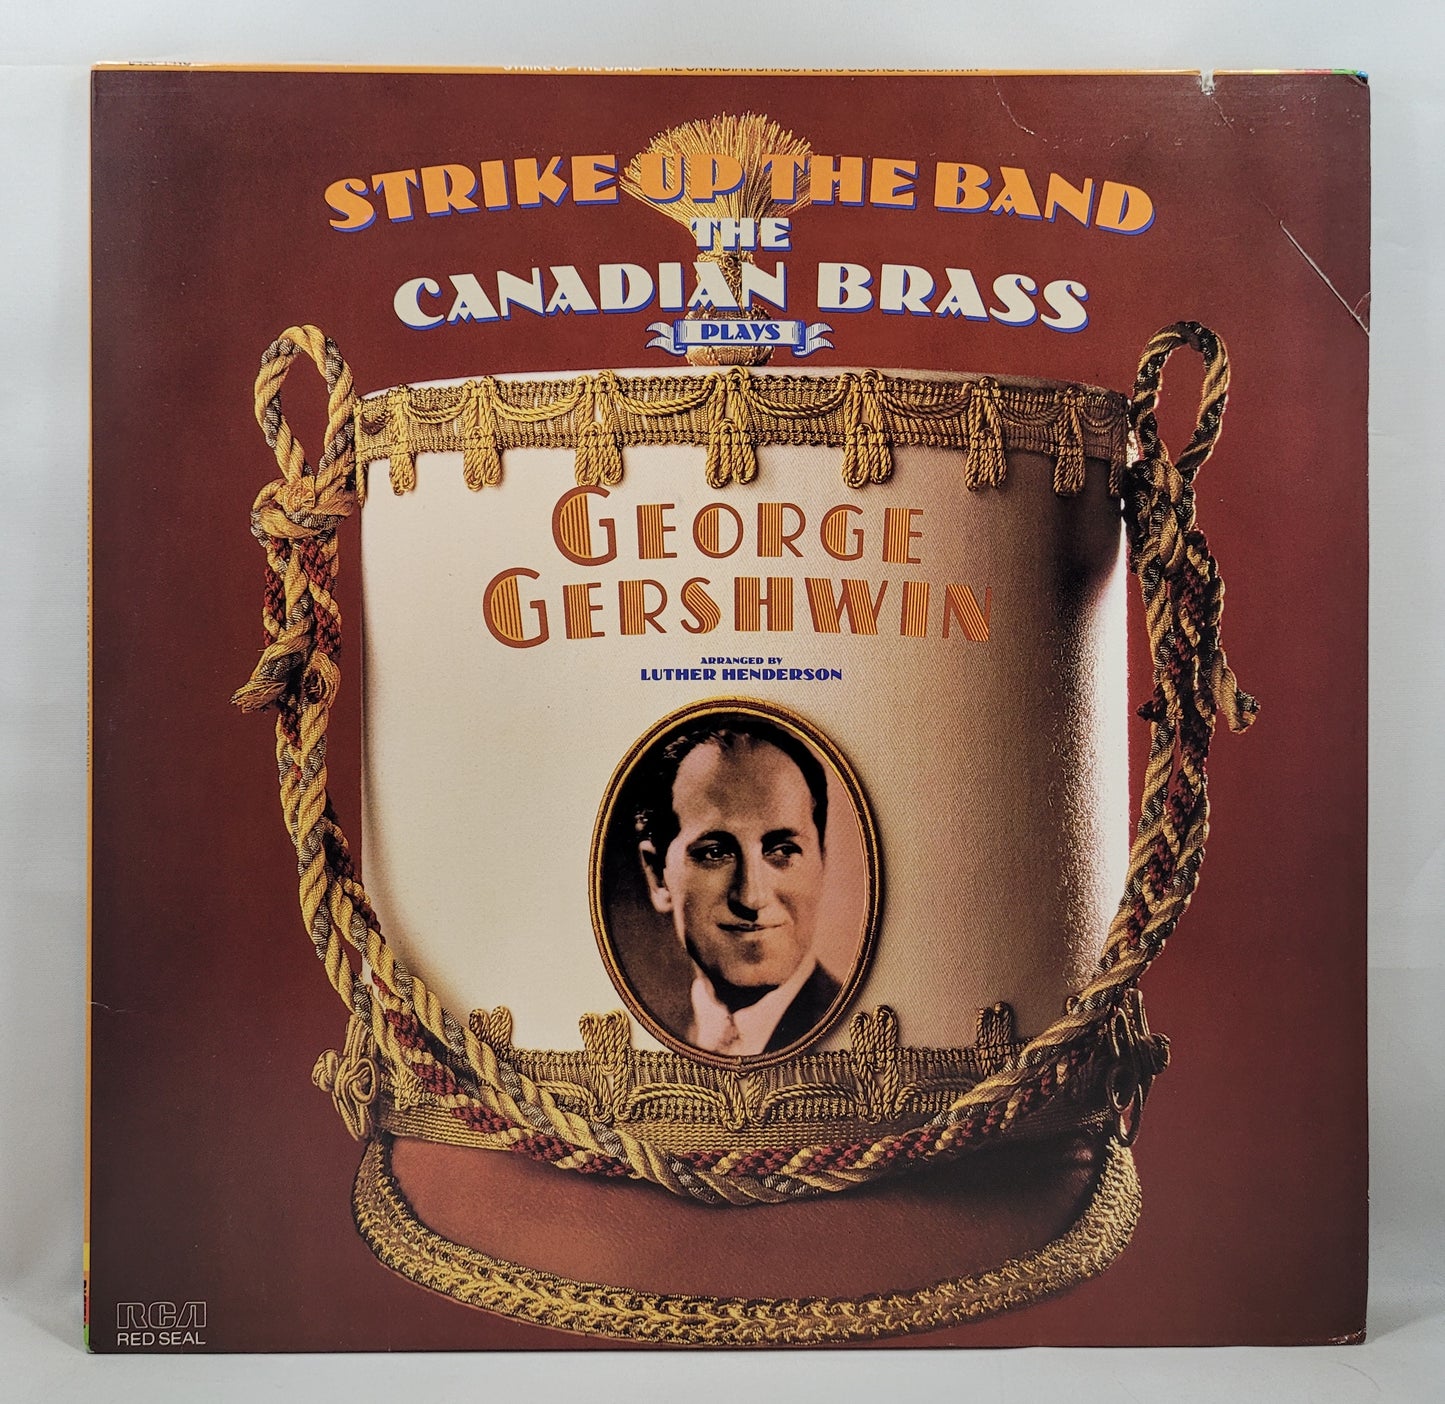 The Canadian Brass - Strike Up the Band [1987 DMM] [Used Vinyl Record LP]